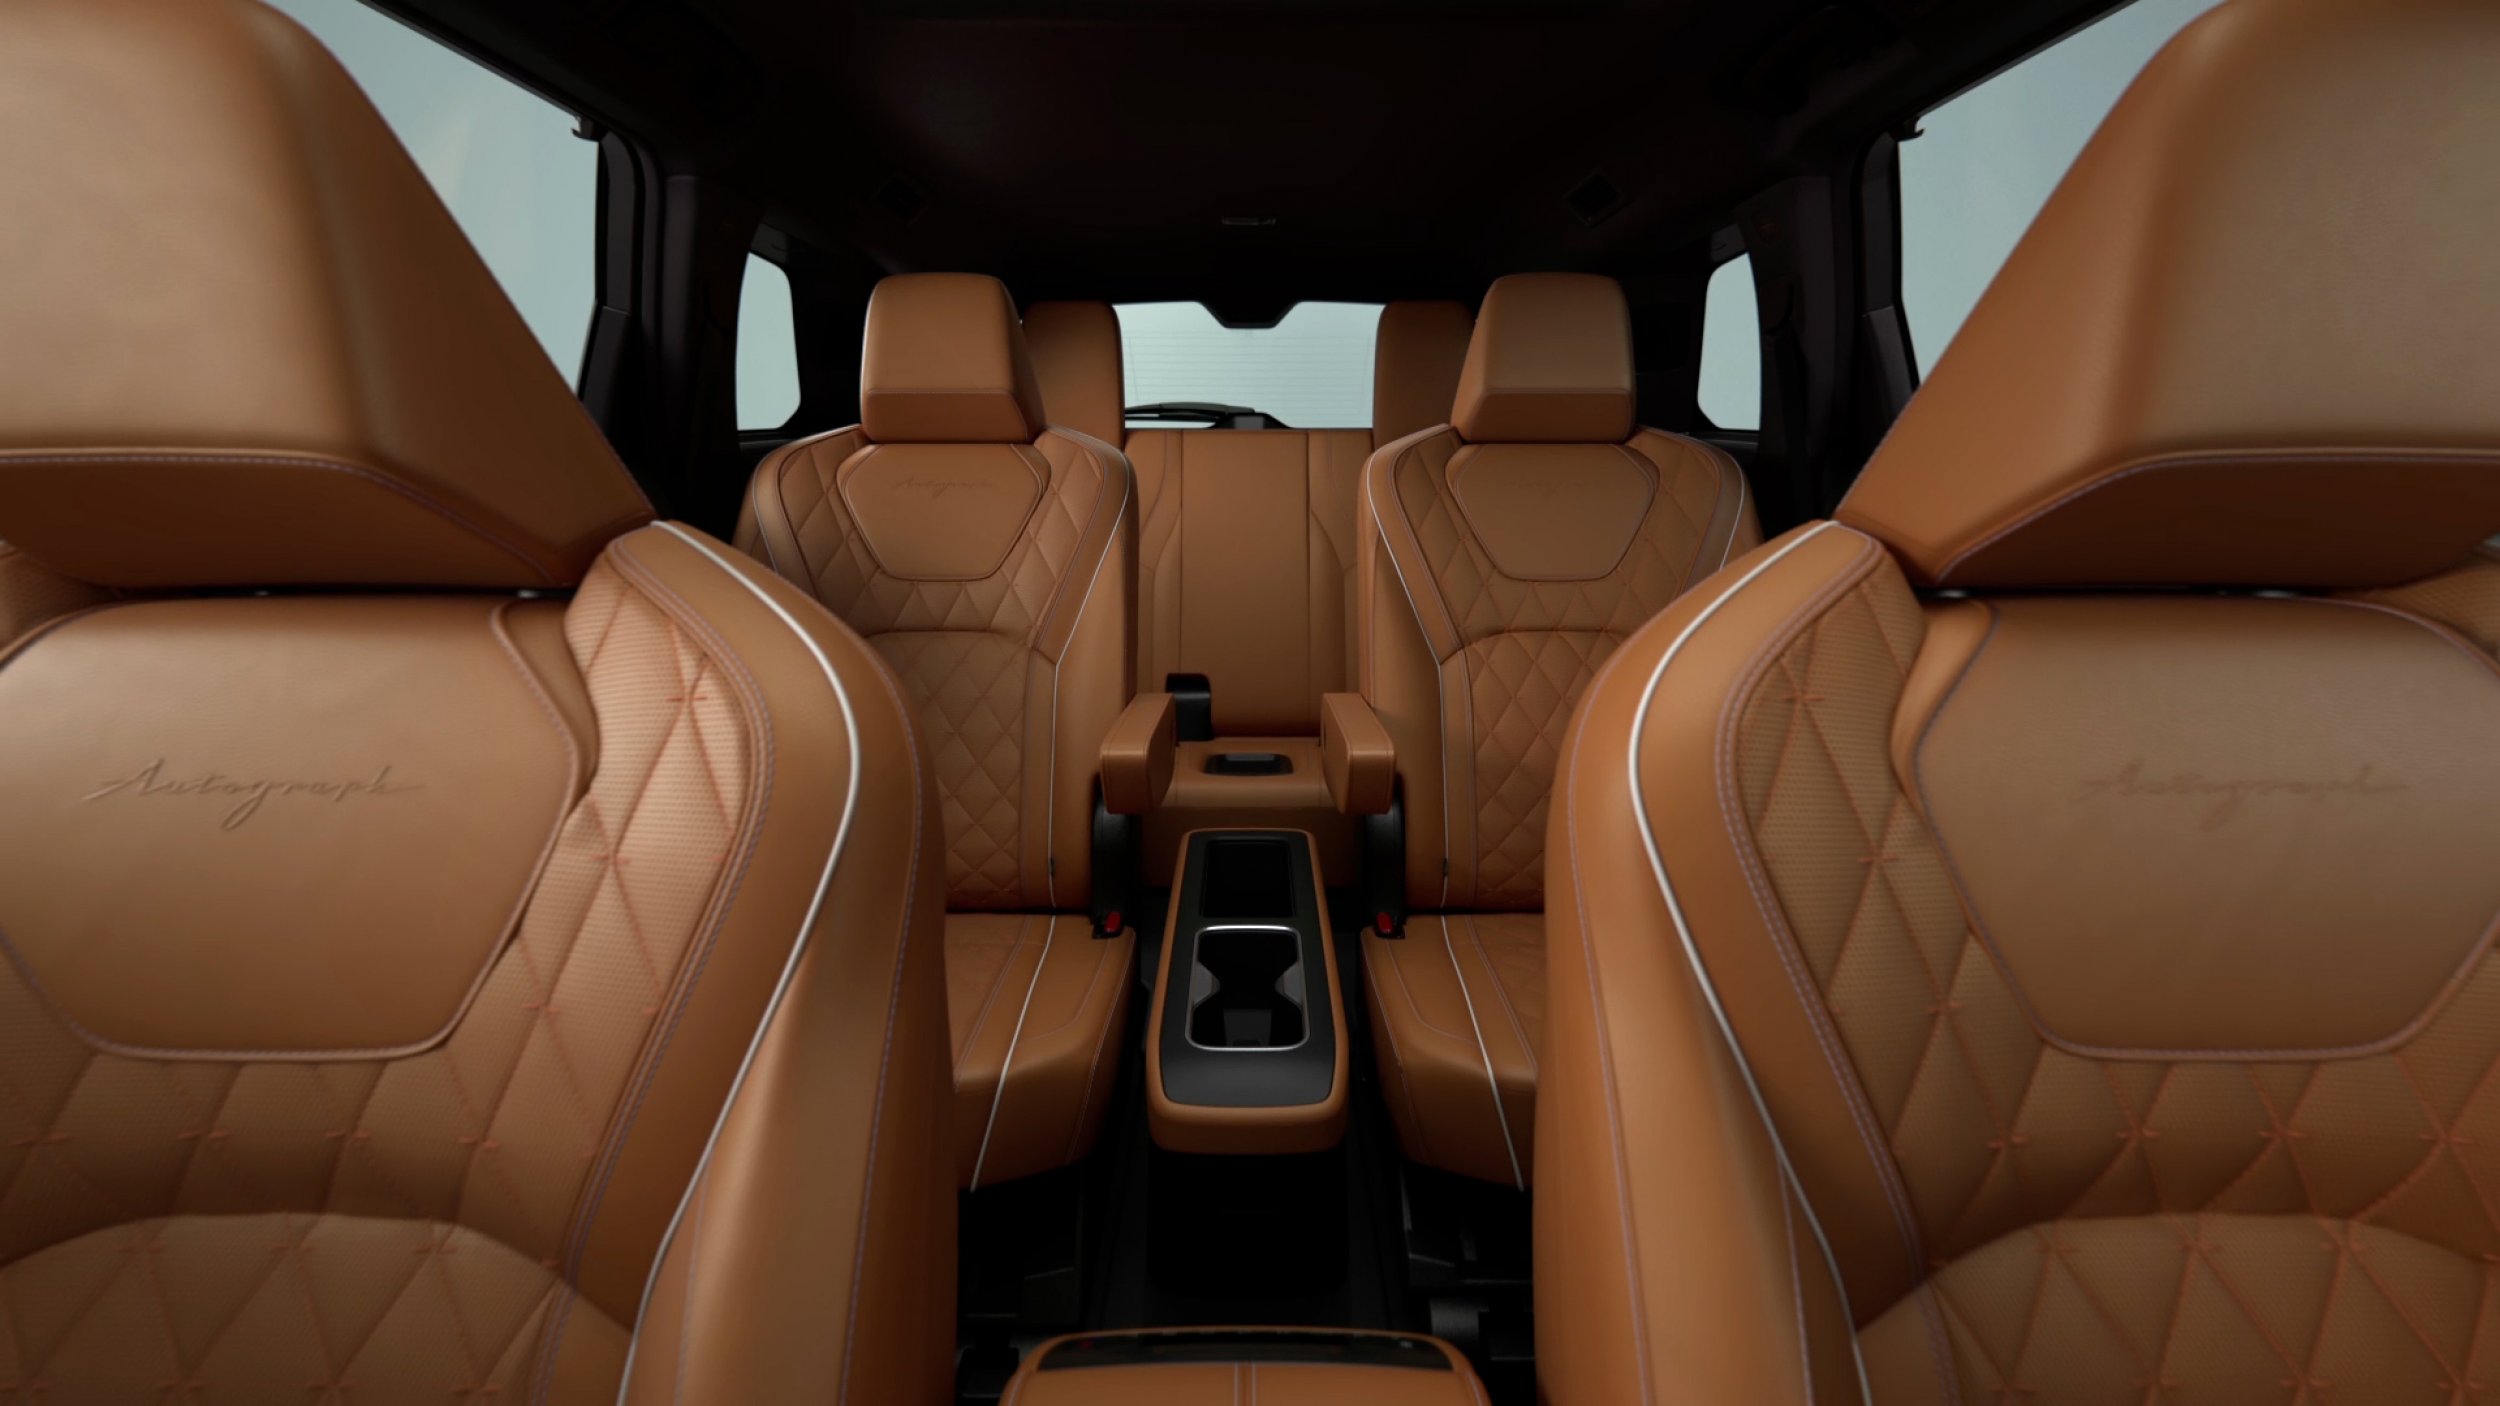 2022 Infiniti QX60s Captains Chairs Are Nearly As Luxurious As Front-Row Seats